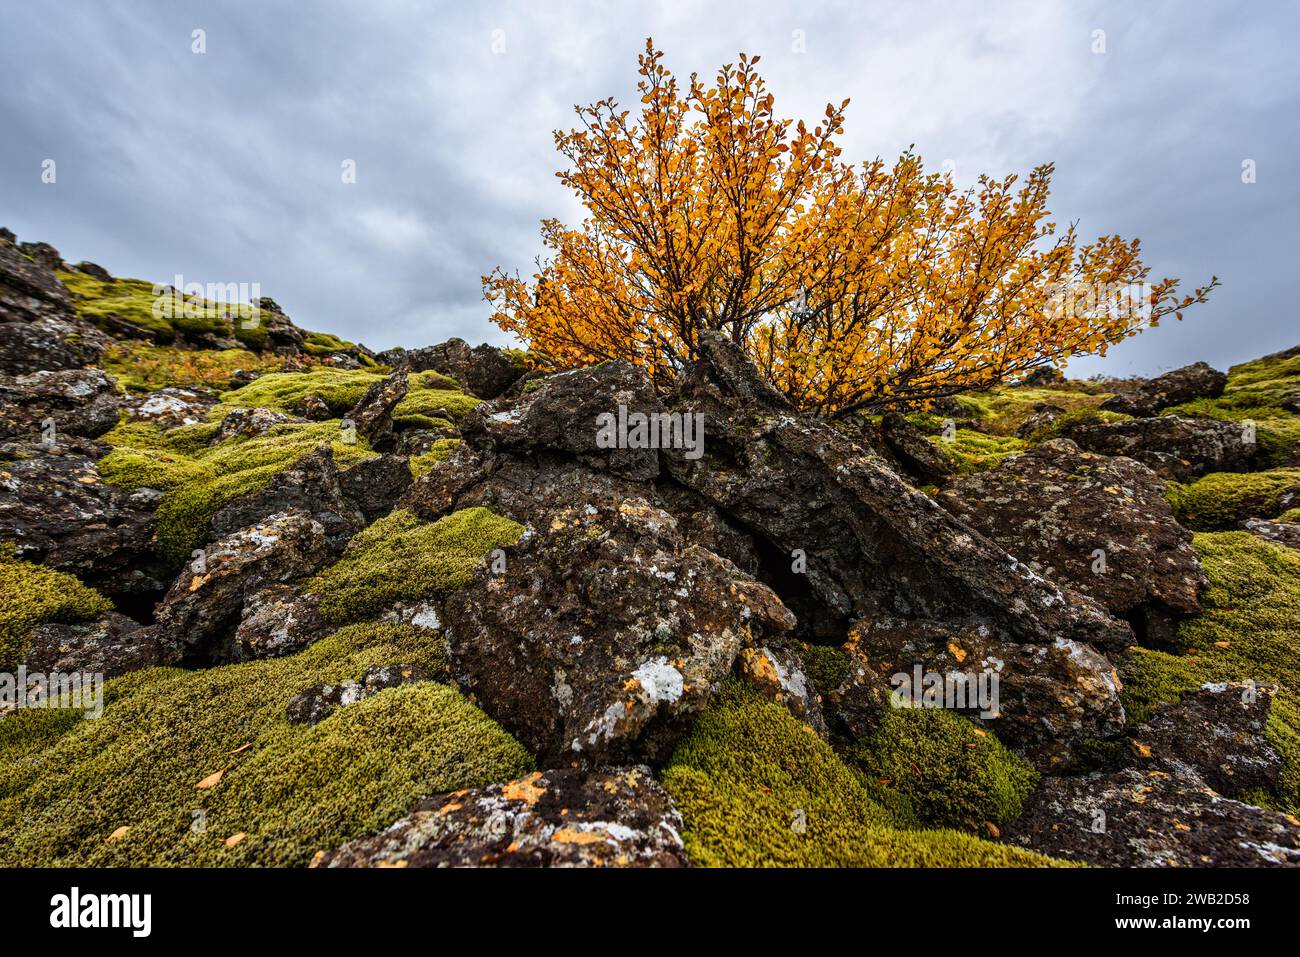 Autumn bush growing on rocky slope covered with moss Stock Photo